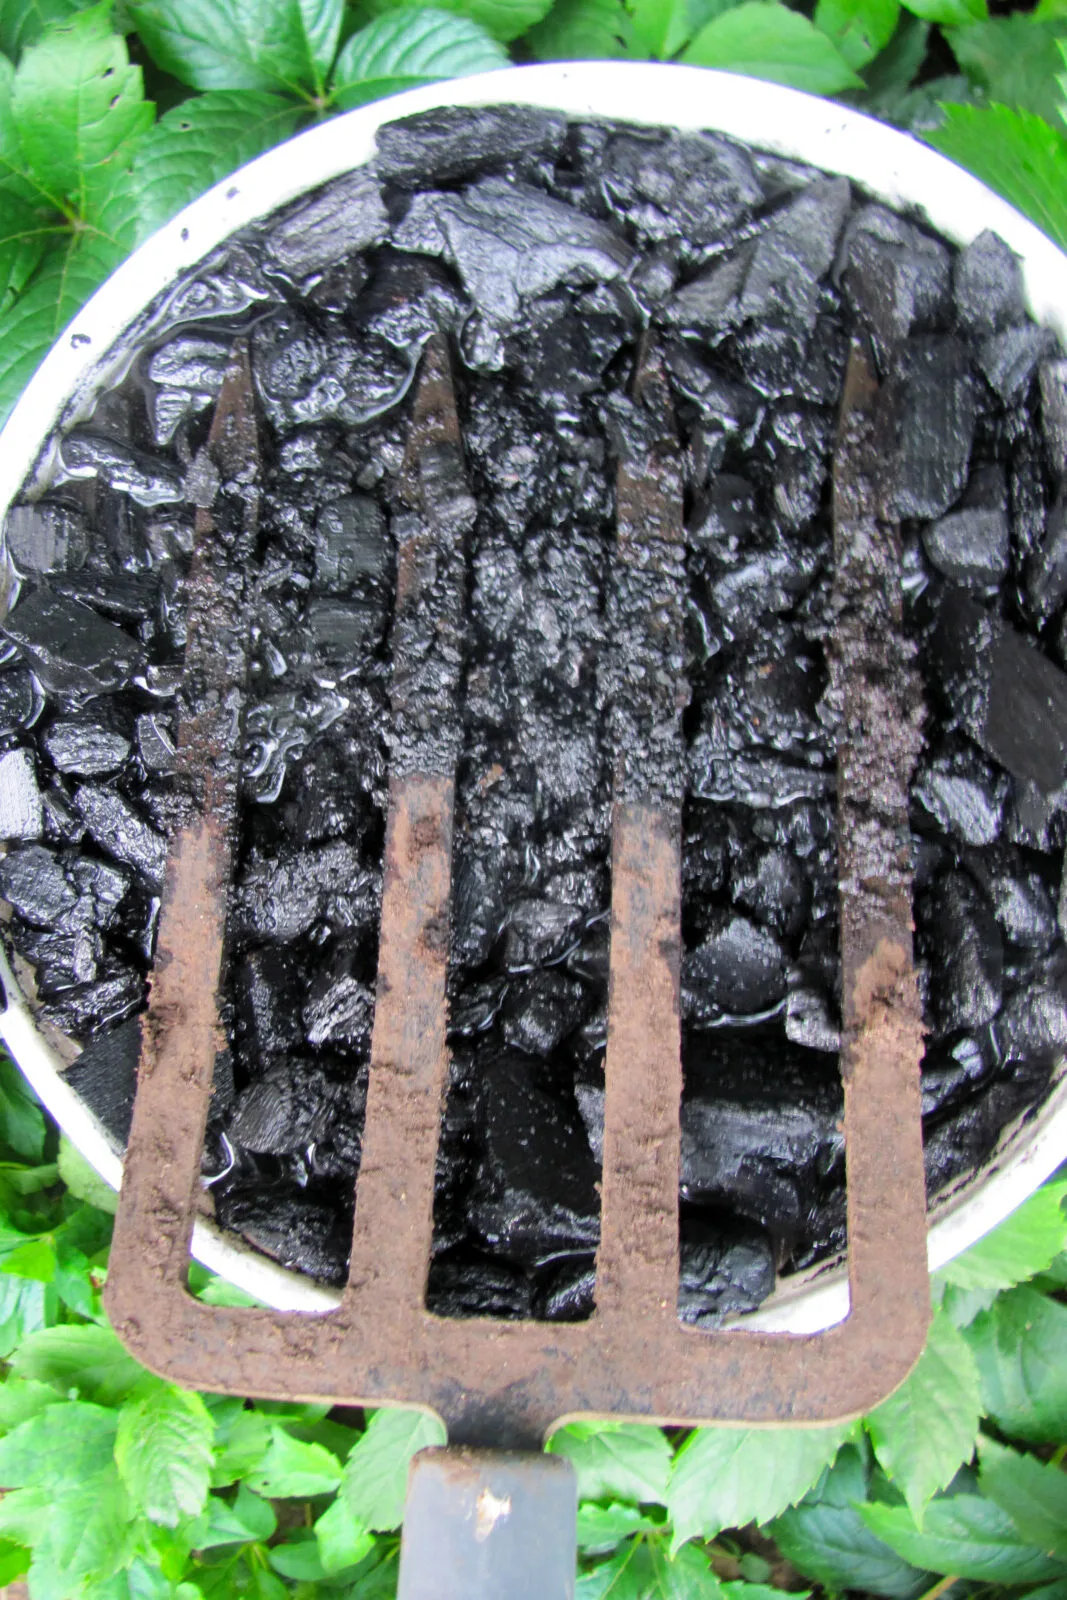 Garden fork pressing charcoal back down into a bucket